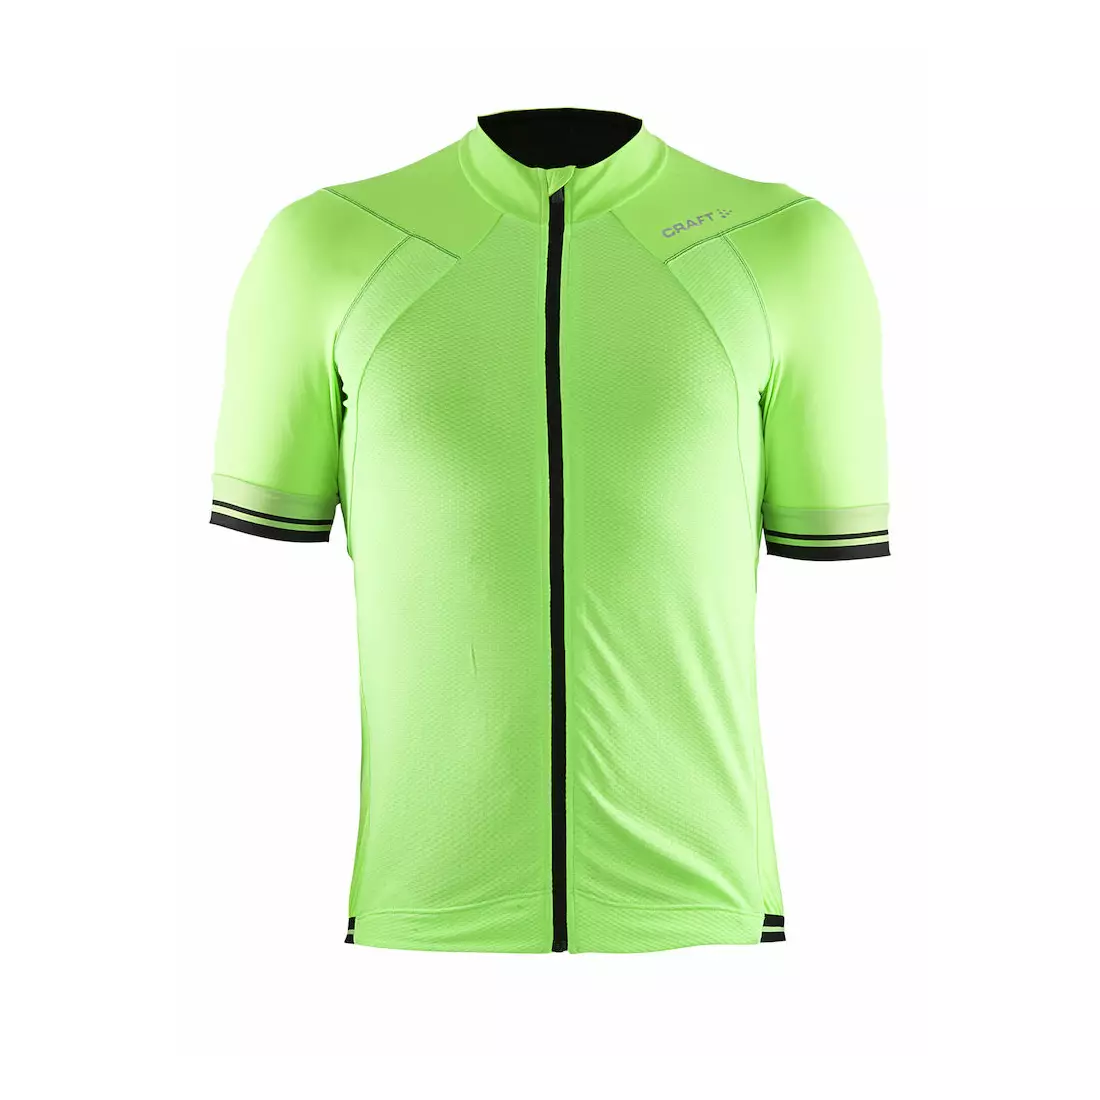 CRAFT PUNCHEUR cycling jersey 1903294-2810